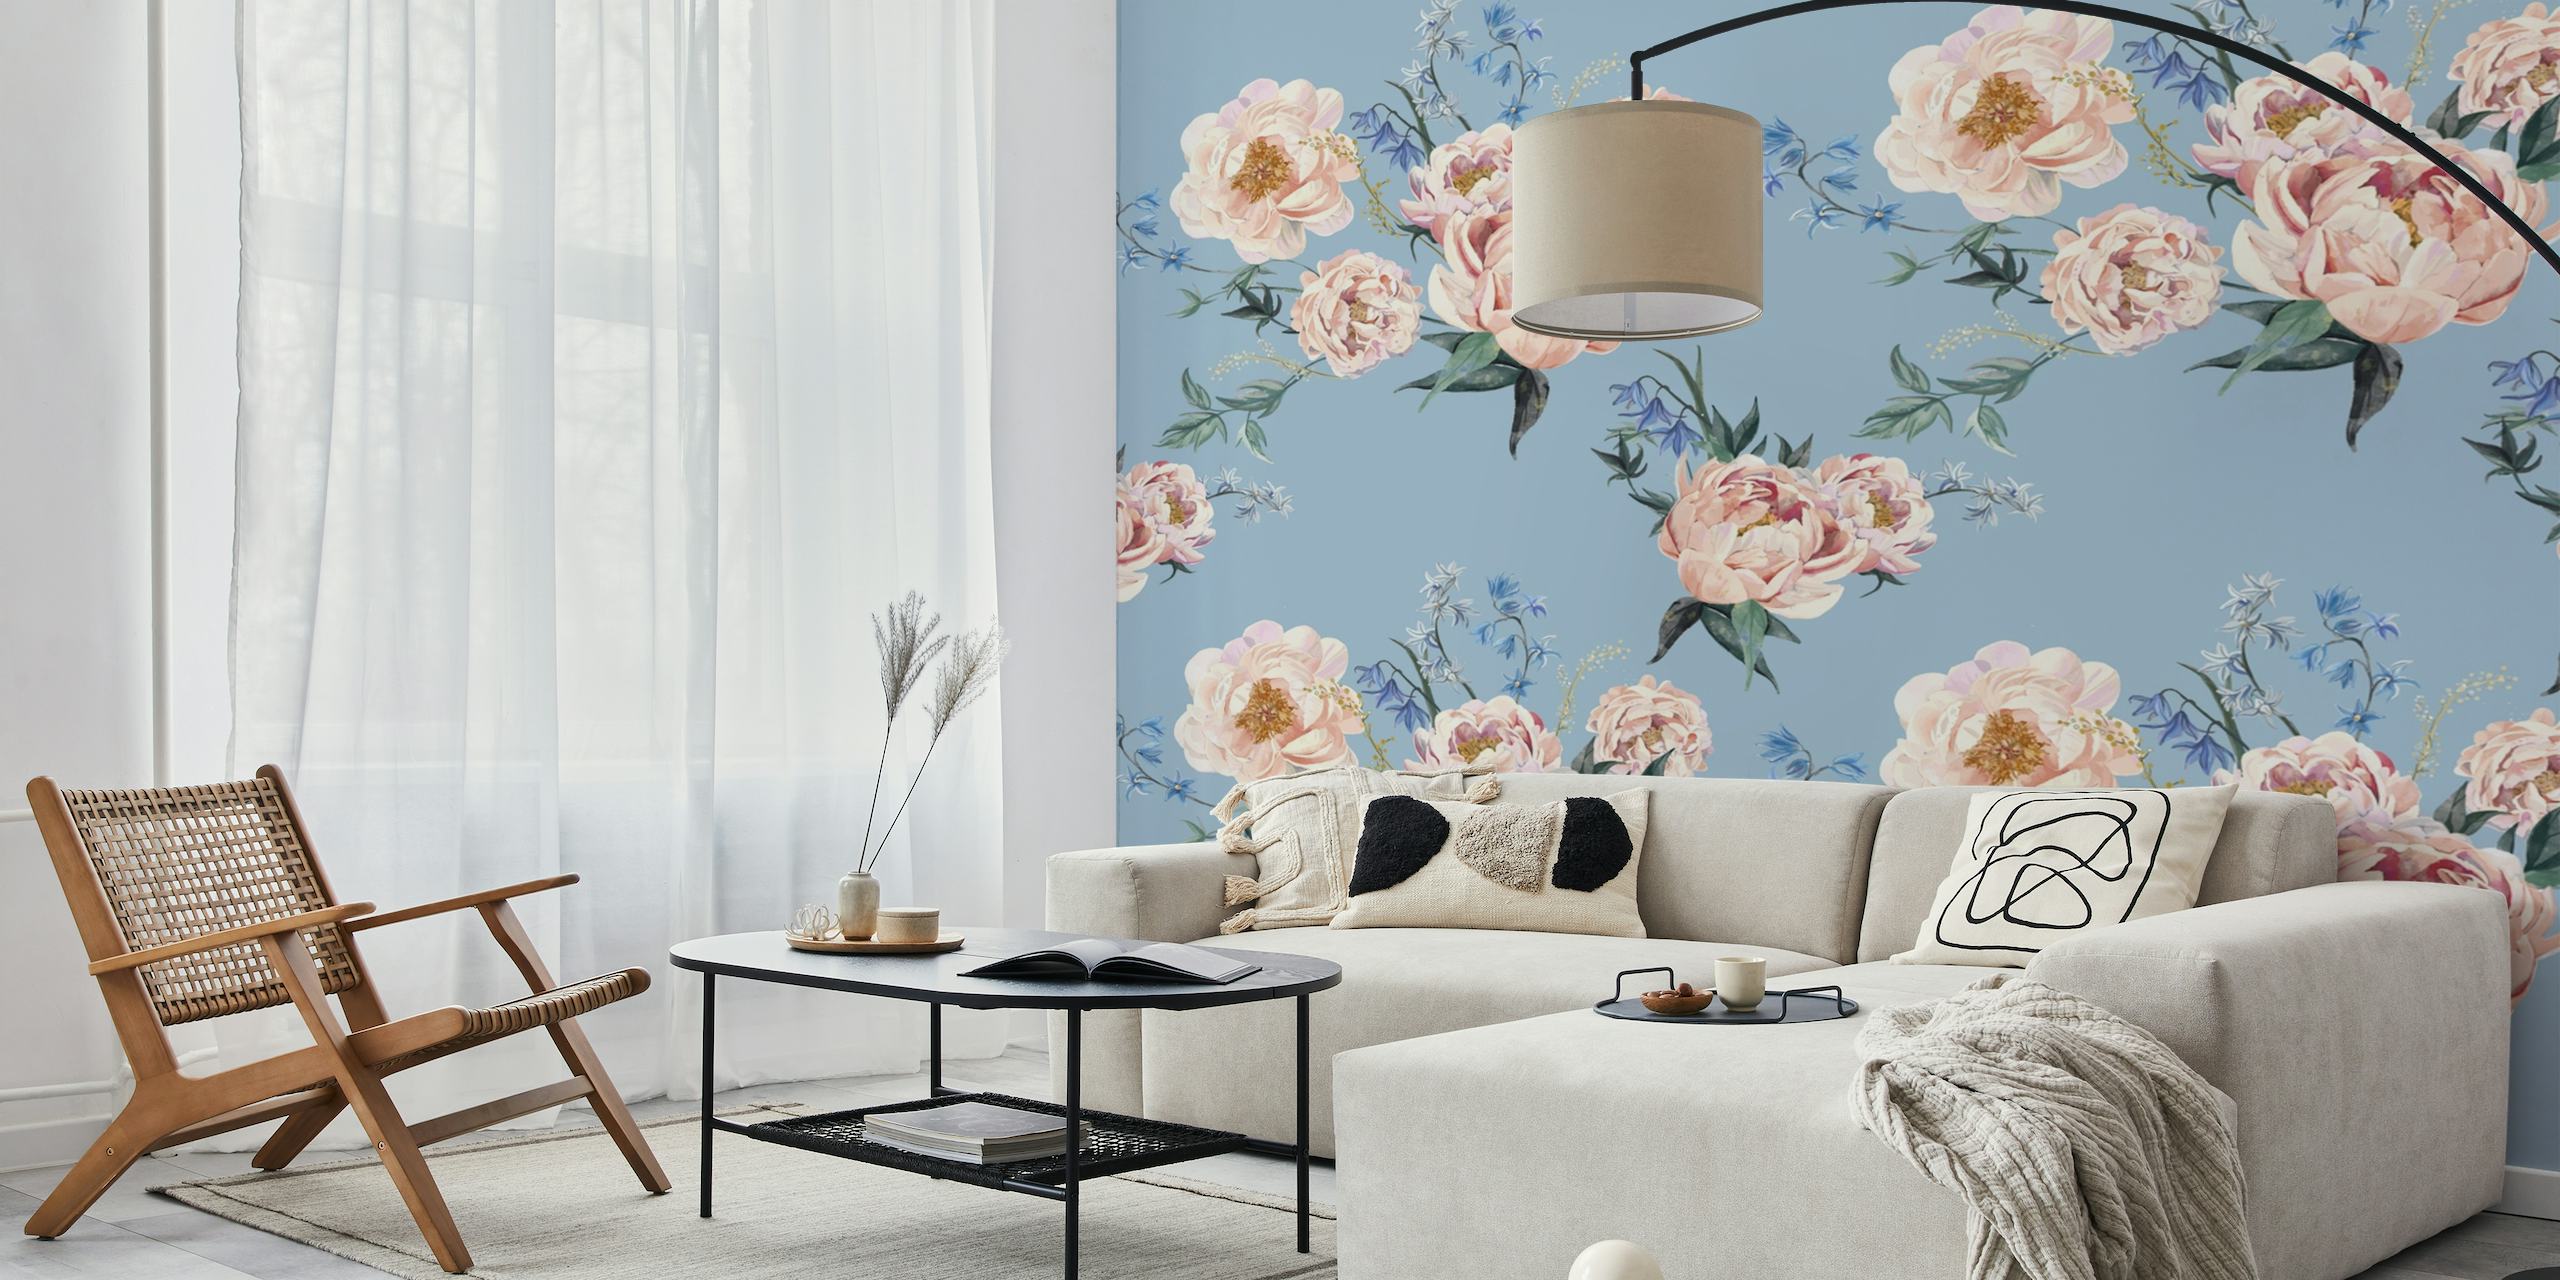 Vintage blue floral pattern wall mural with large-scale blooms and pastel colors